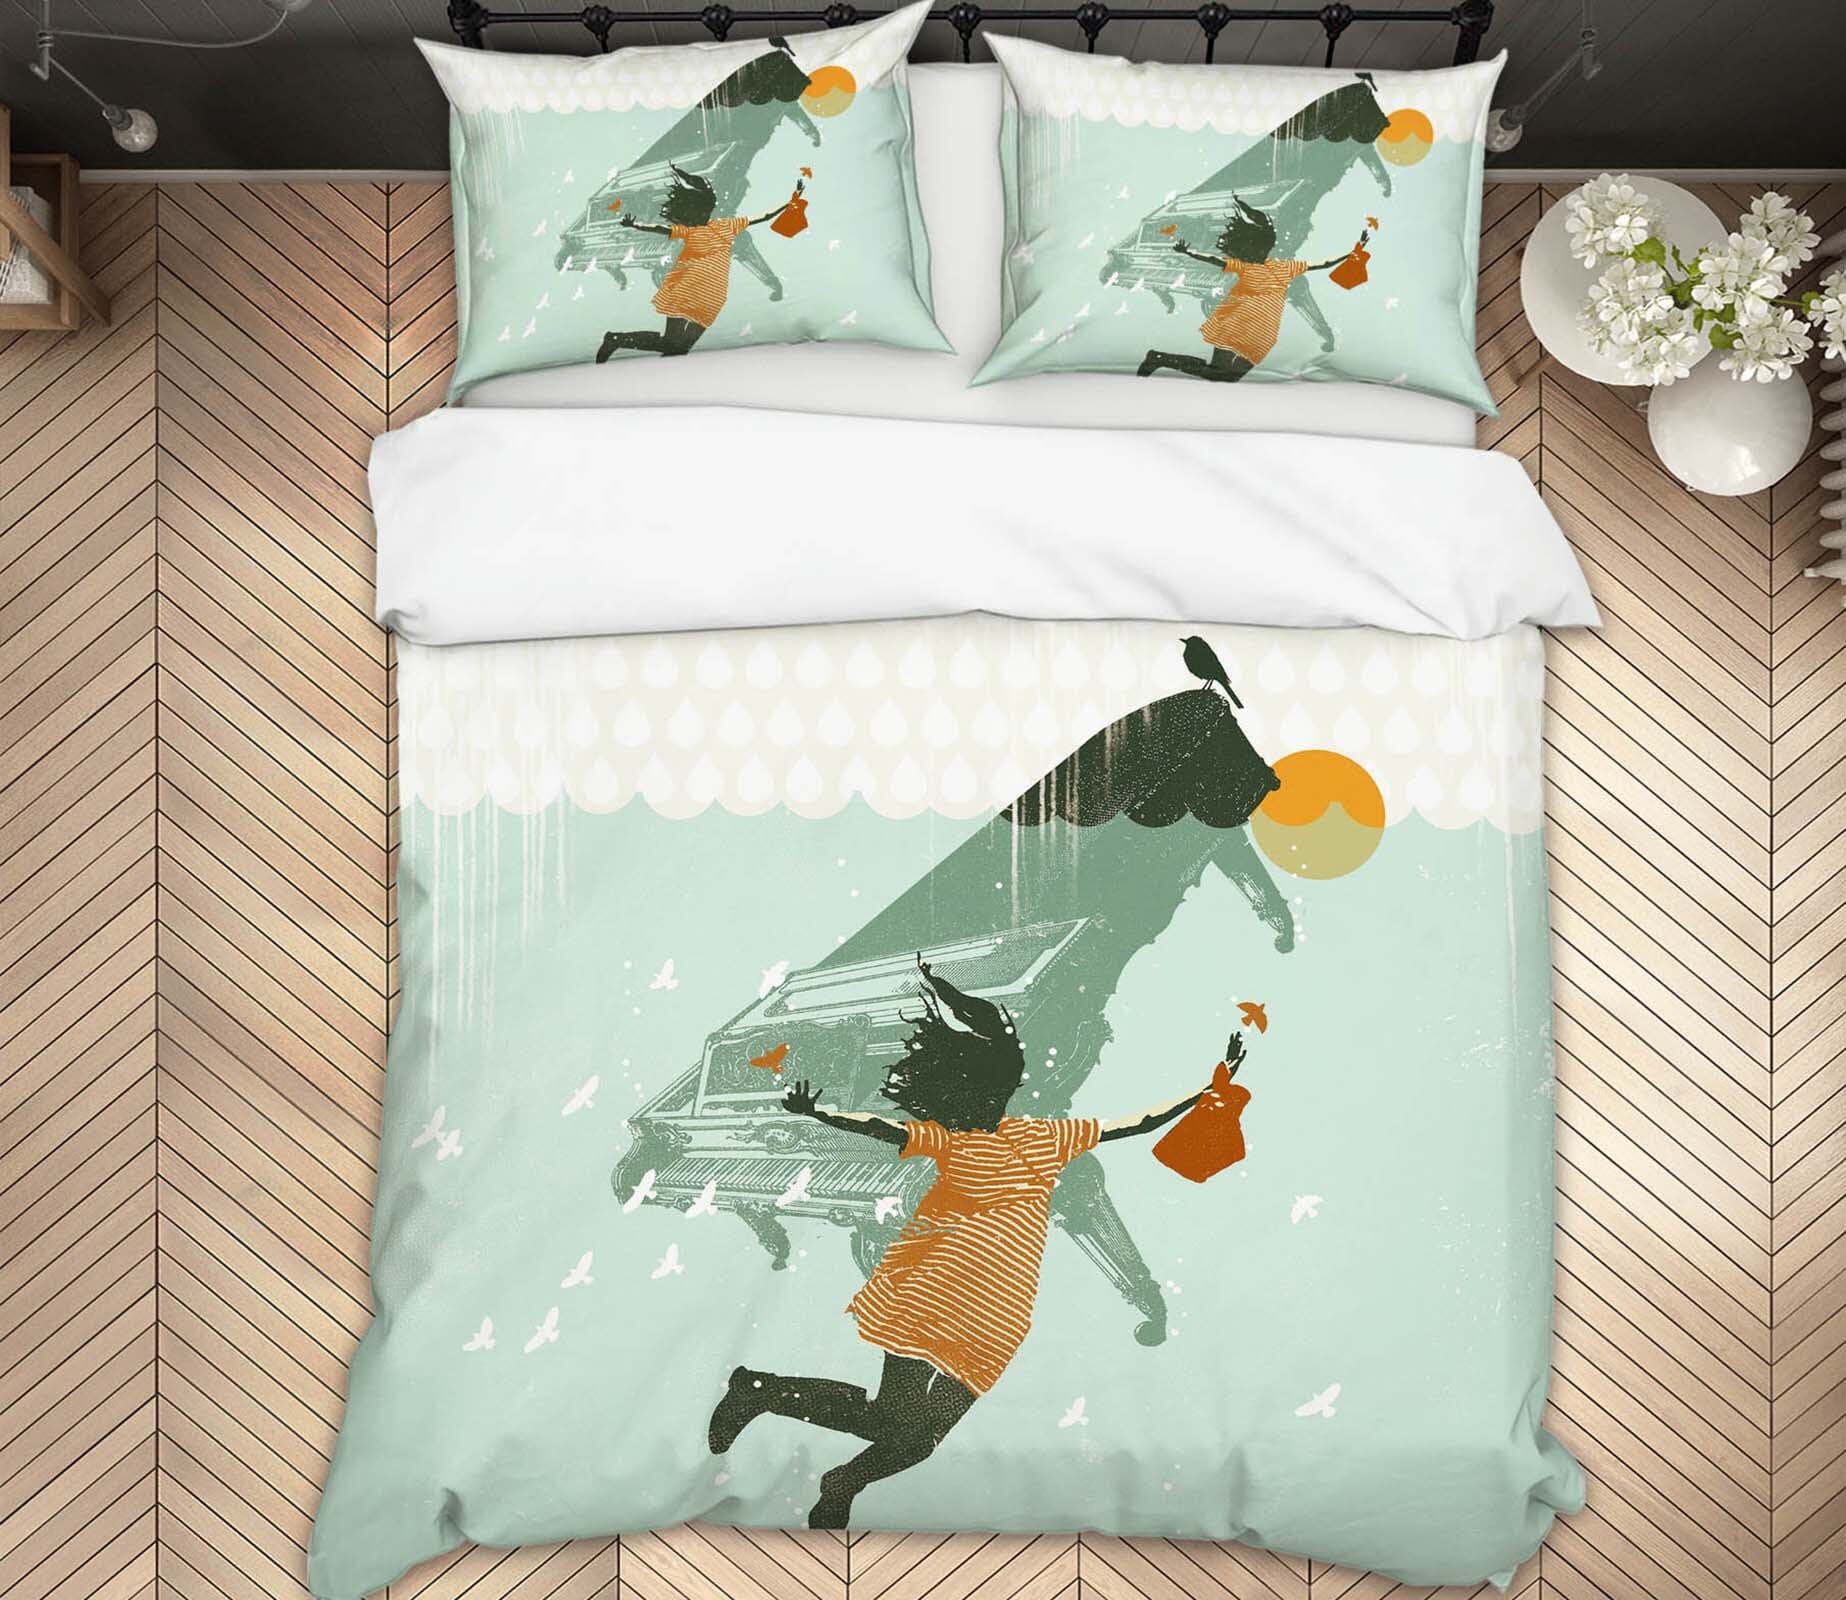 3D Swimming In Water 2119 Showdeer Bedding Bed Pillowcases Quilt Quiet Covers AJ Creativity Home 